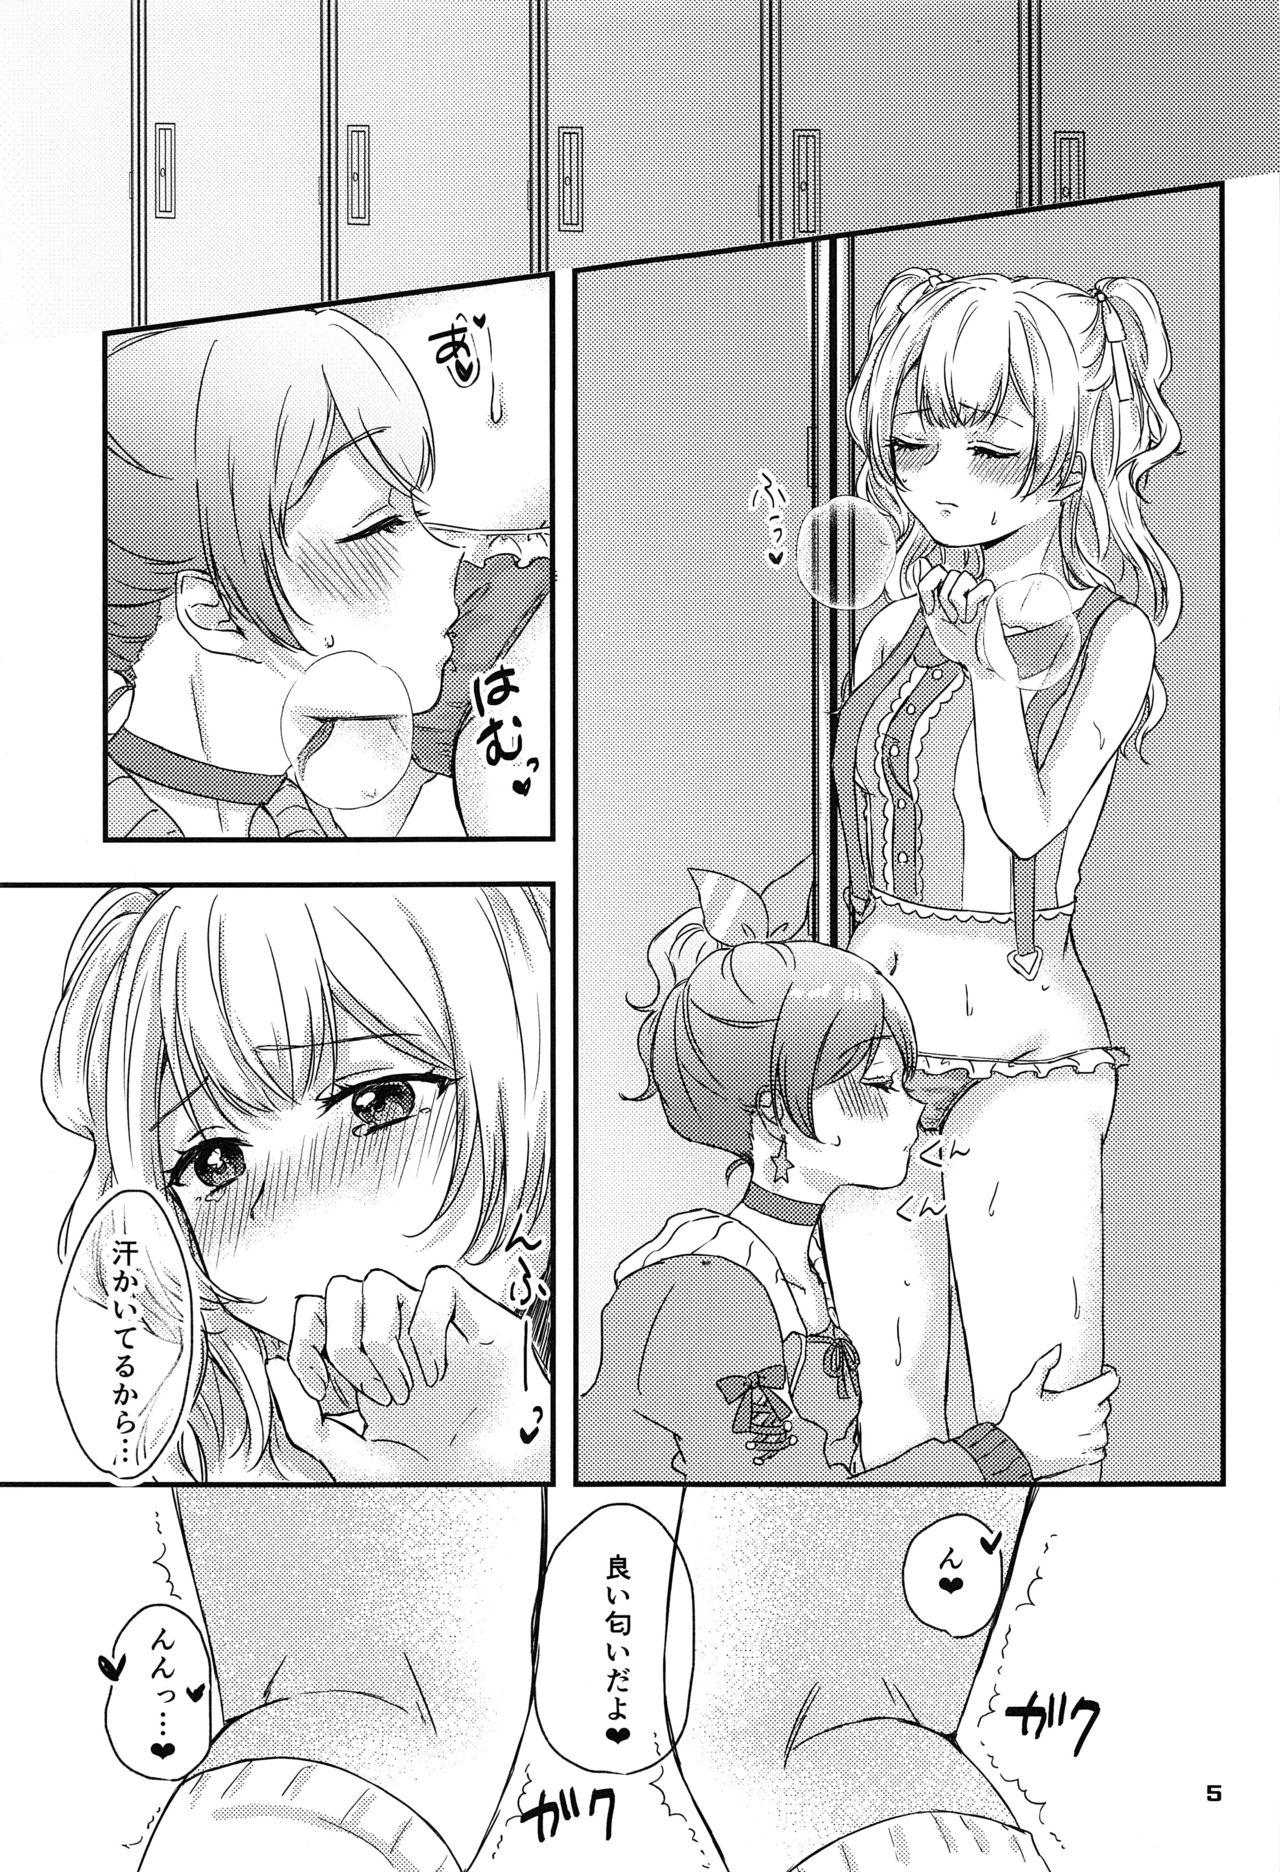 Police Sweet Costume Sex time. - Bang dream Spy Cam - Page 3